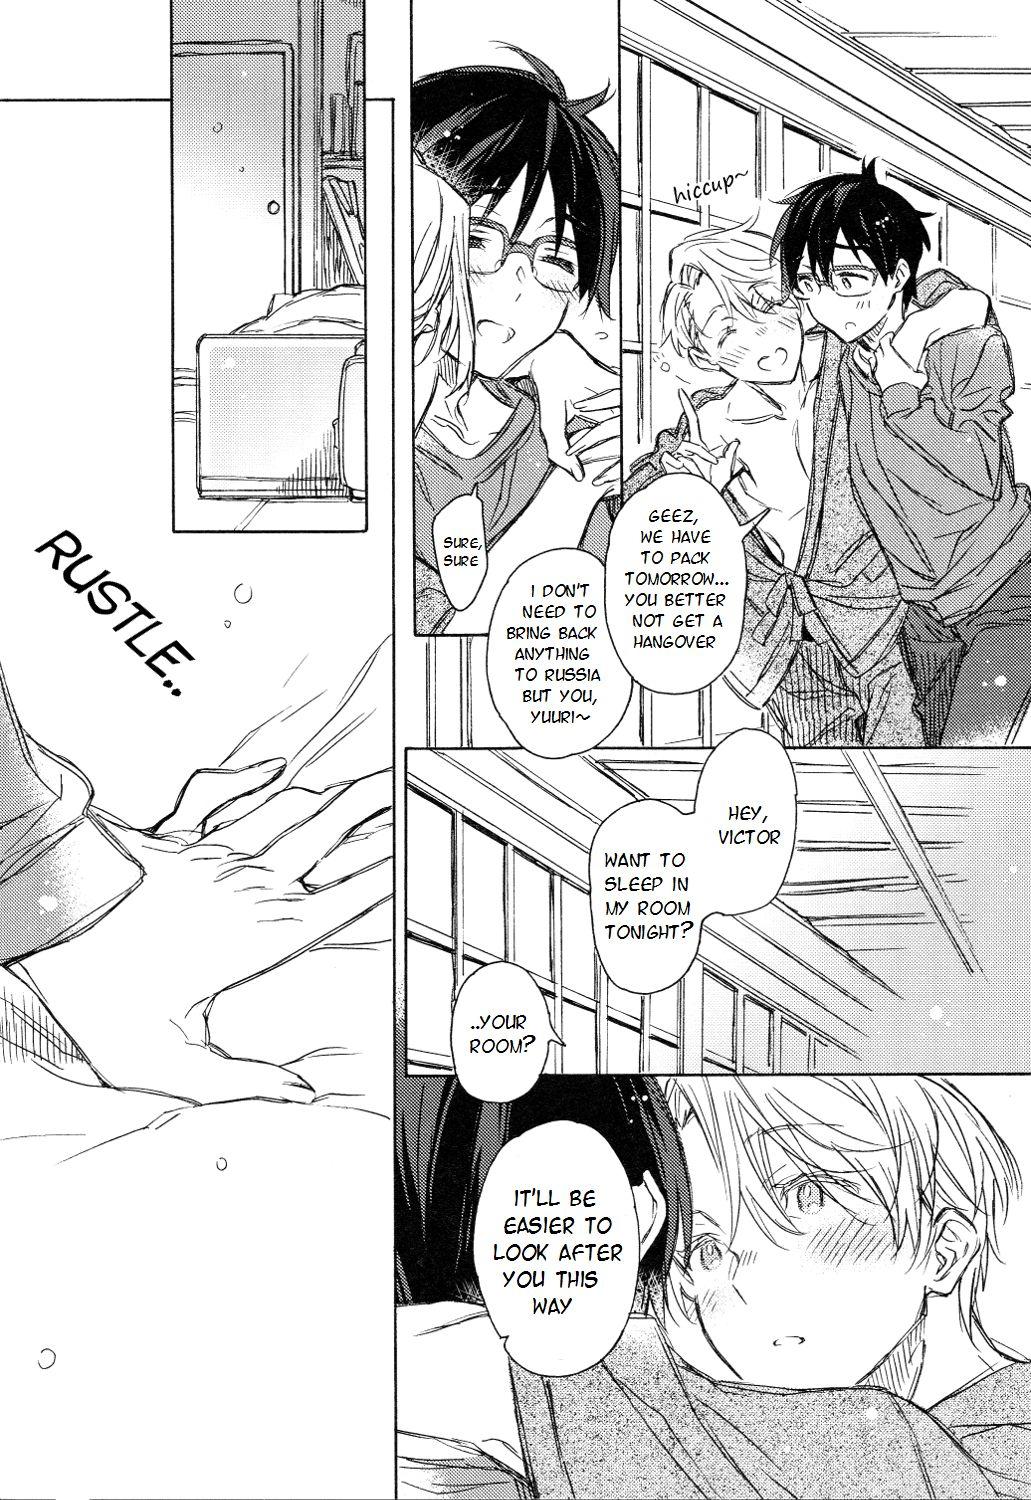 Facial Cumshot BRAND NEW DAY,BRAND NEW LIFE - Yuri on ice German - Page 7